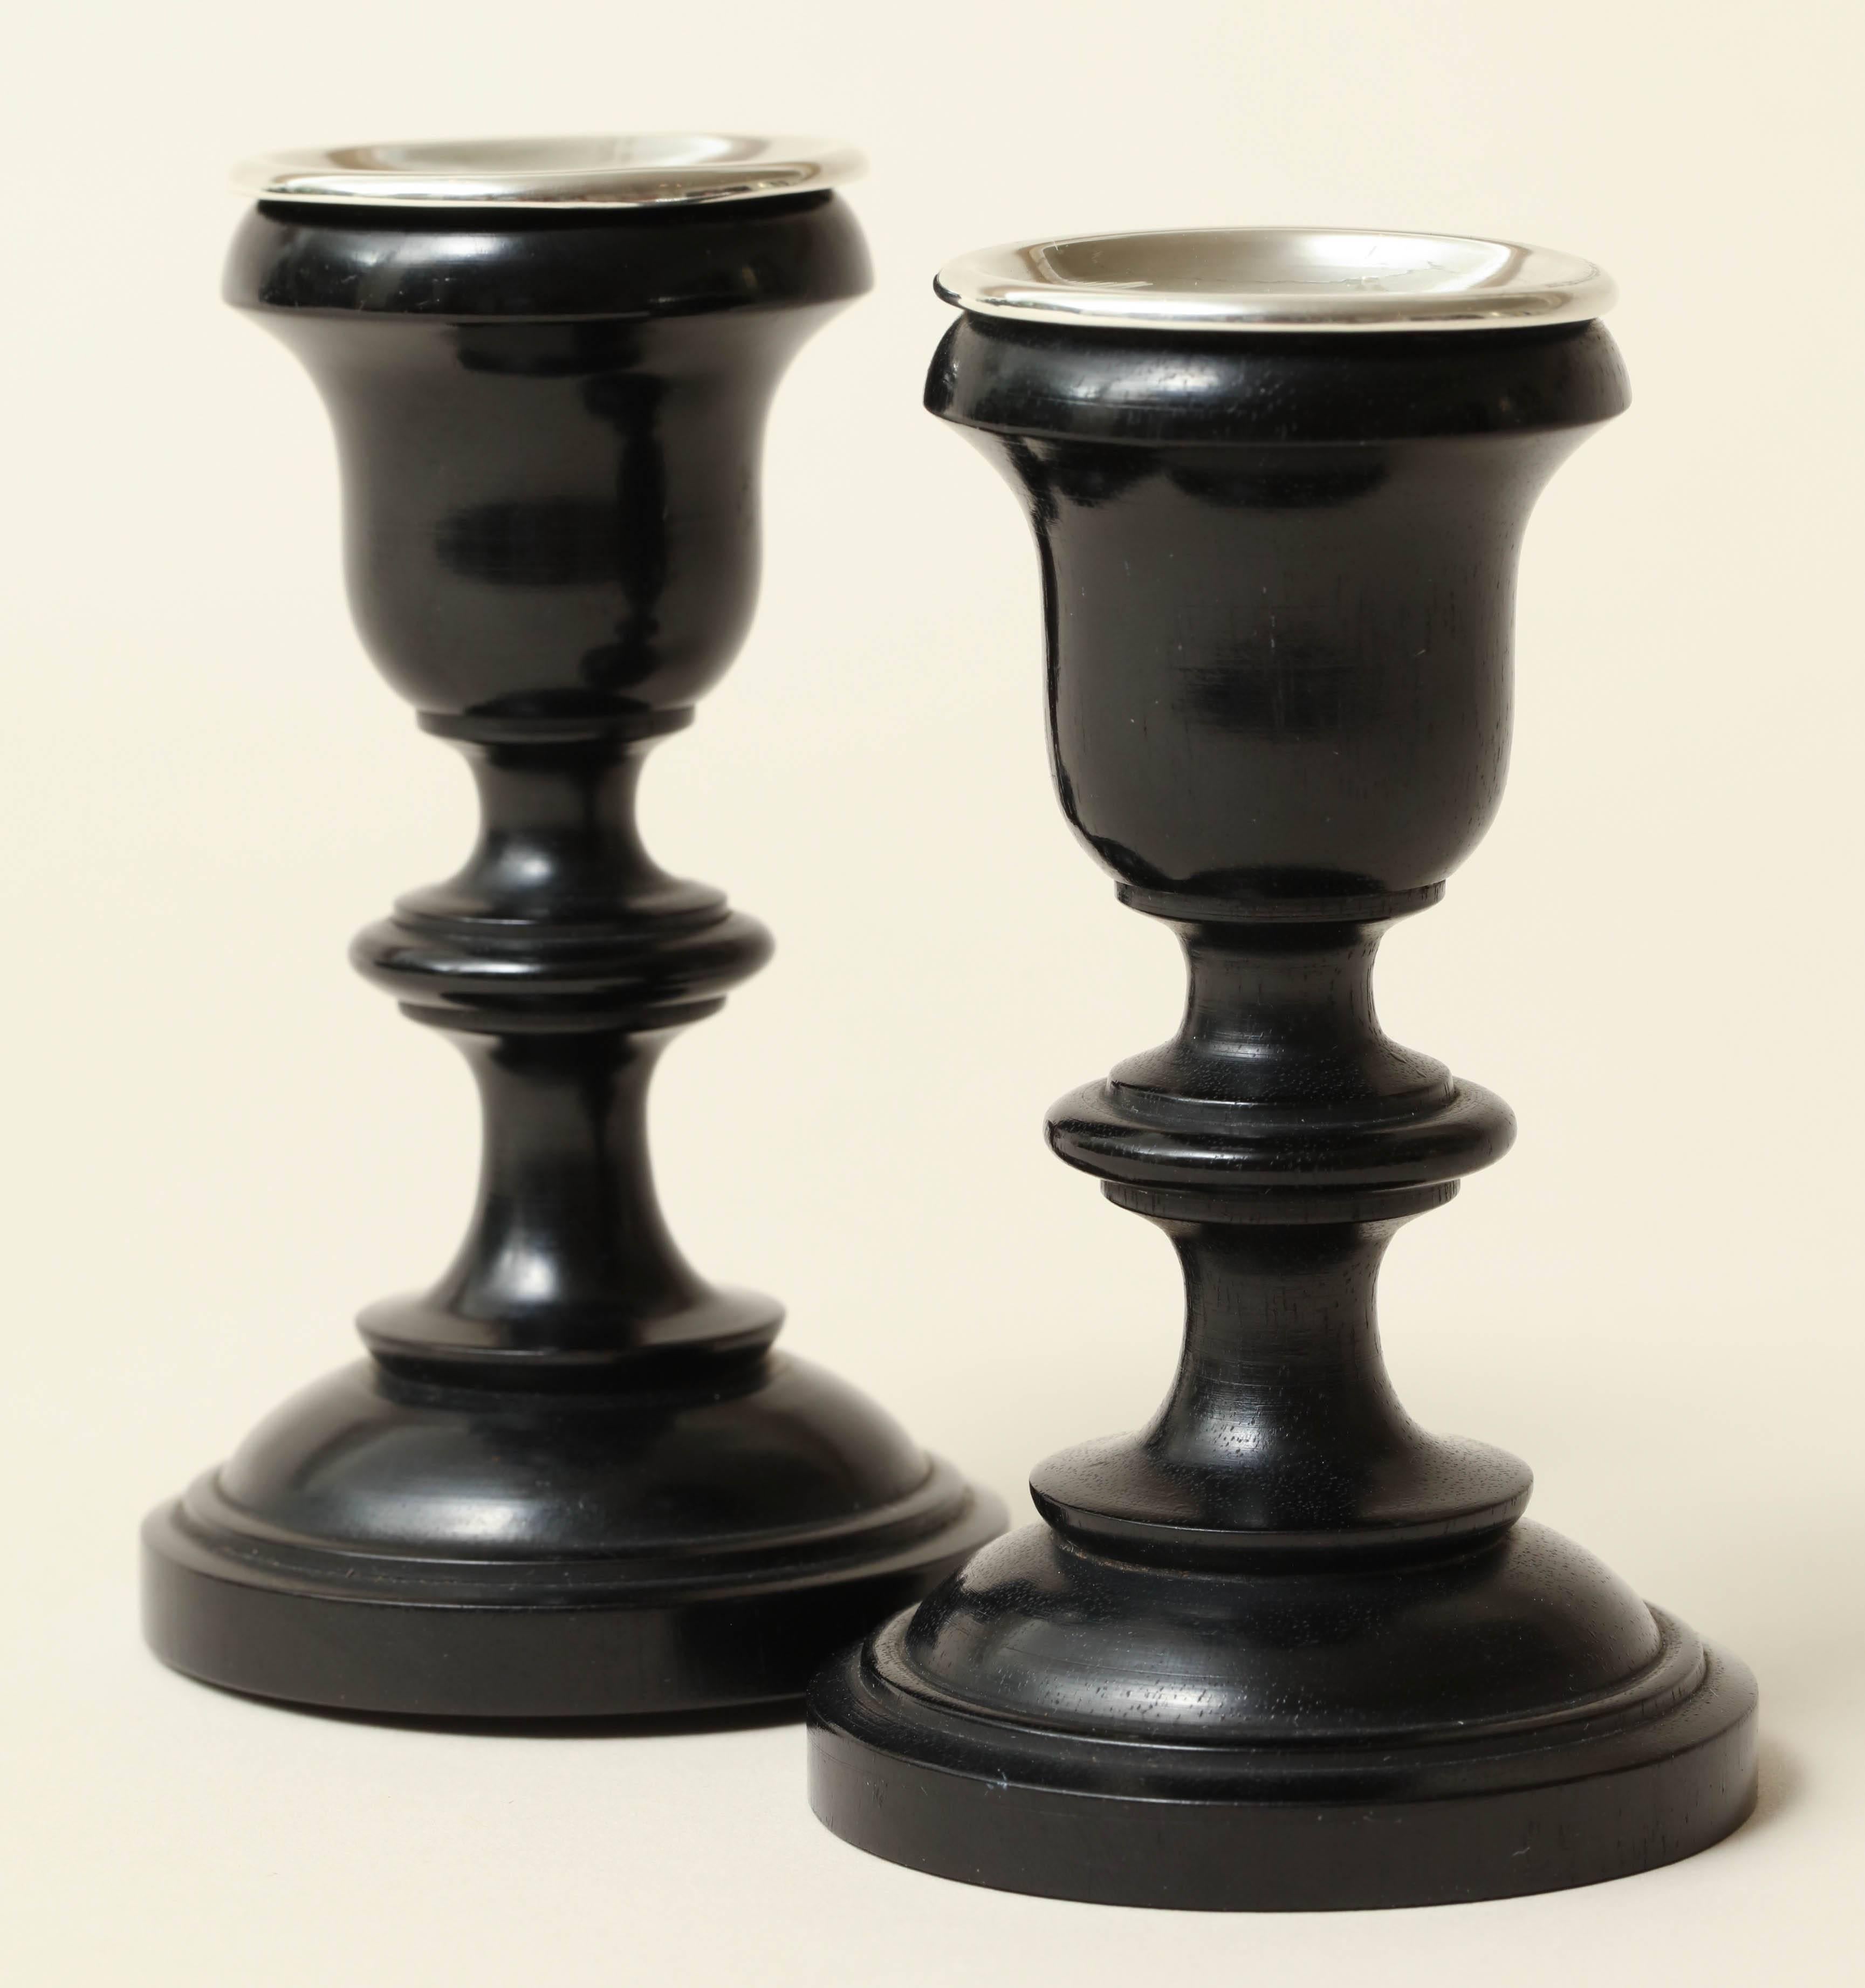 Small ebony candlesticks with sterling silver holders.
Hallmarked for 925 silver/ Birmingham/ 1922/ V &St. J.

(Price shown is reduced price, no further trade discount) 